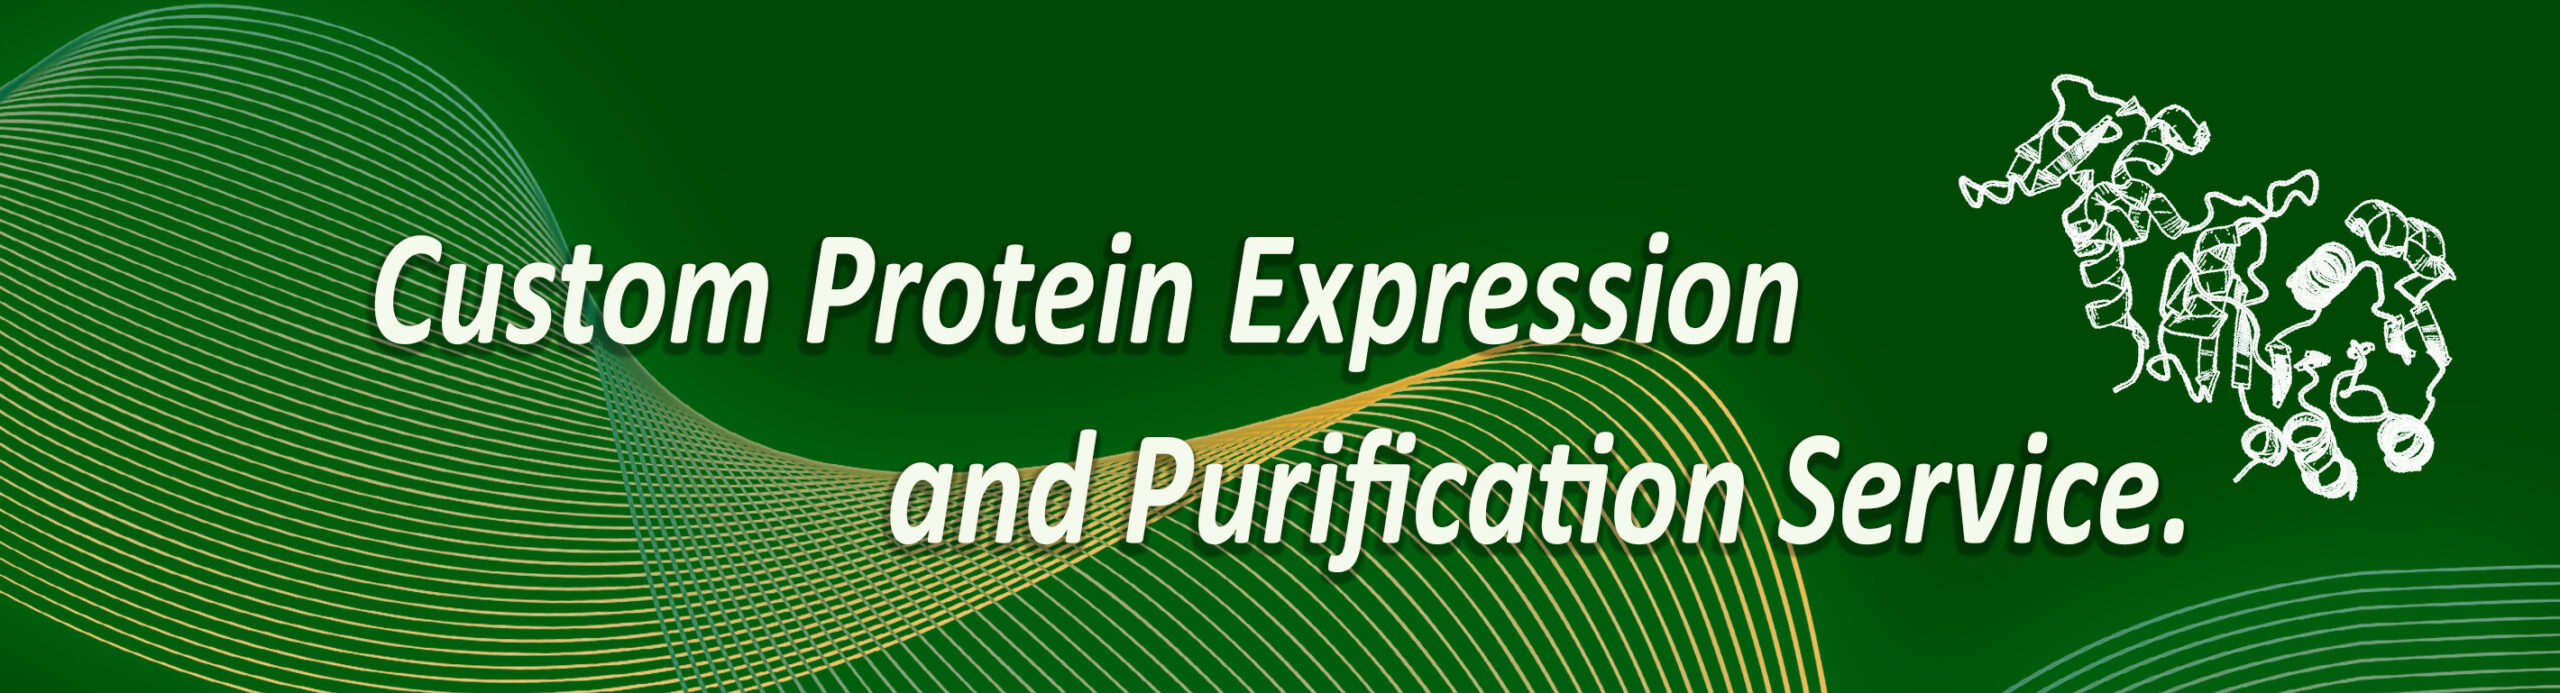 Custom Protein Expression